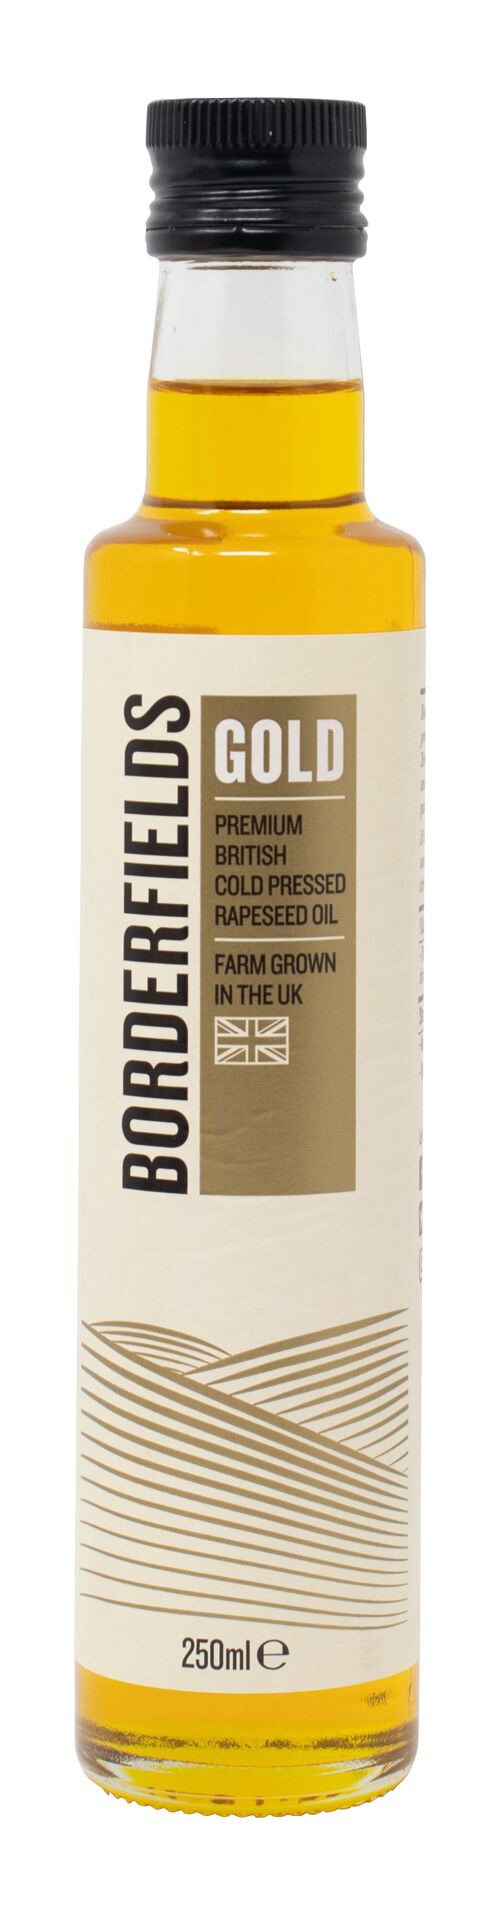 British Cold Pressed Rapeseed Oil